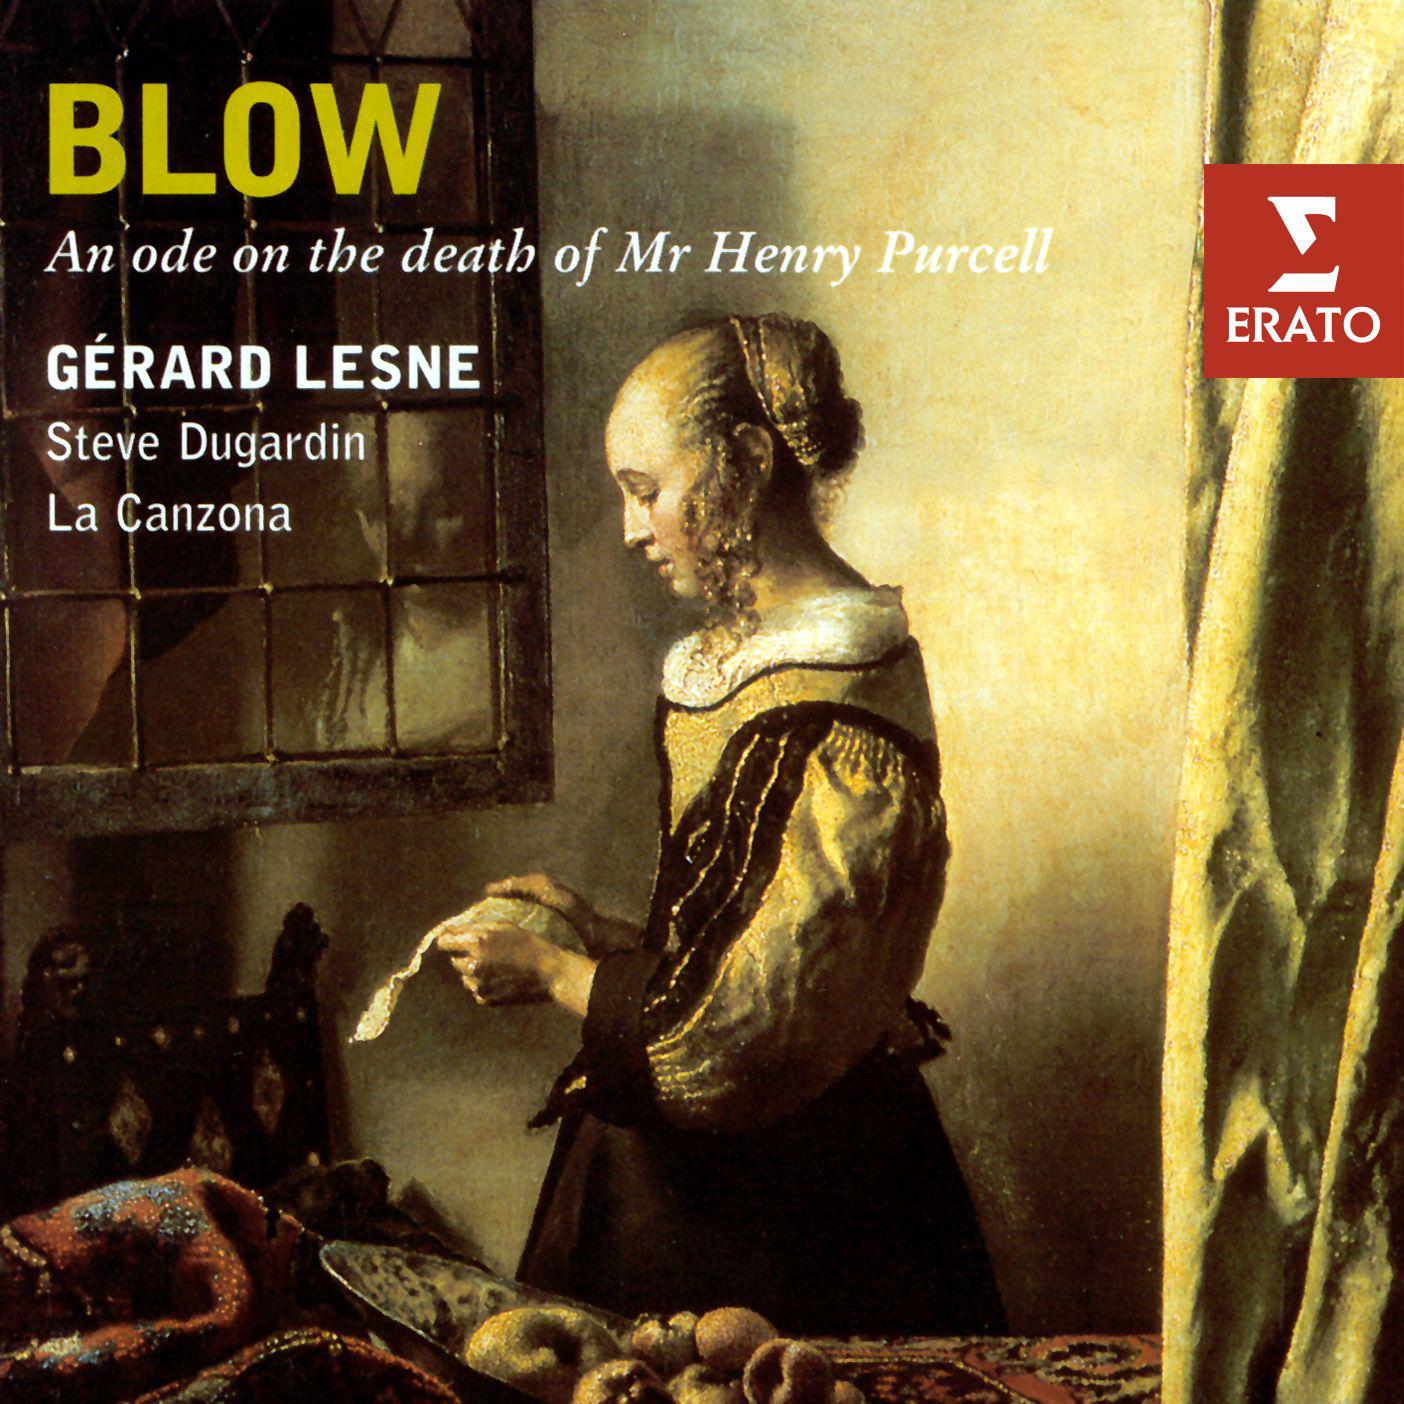 Blow: An ode on the death of Mr. Henry Purcell etc.